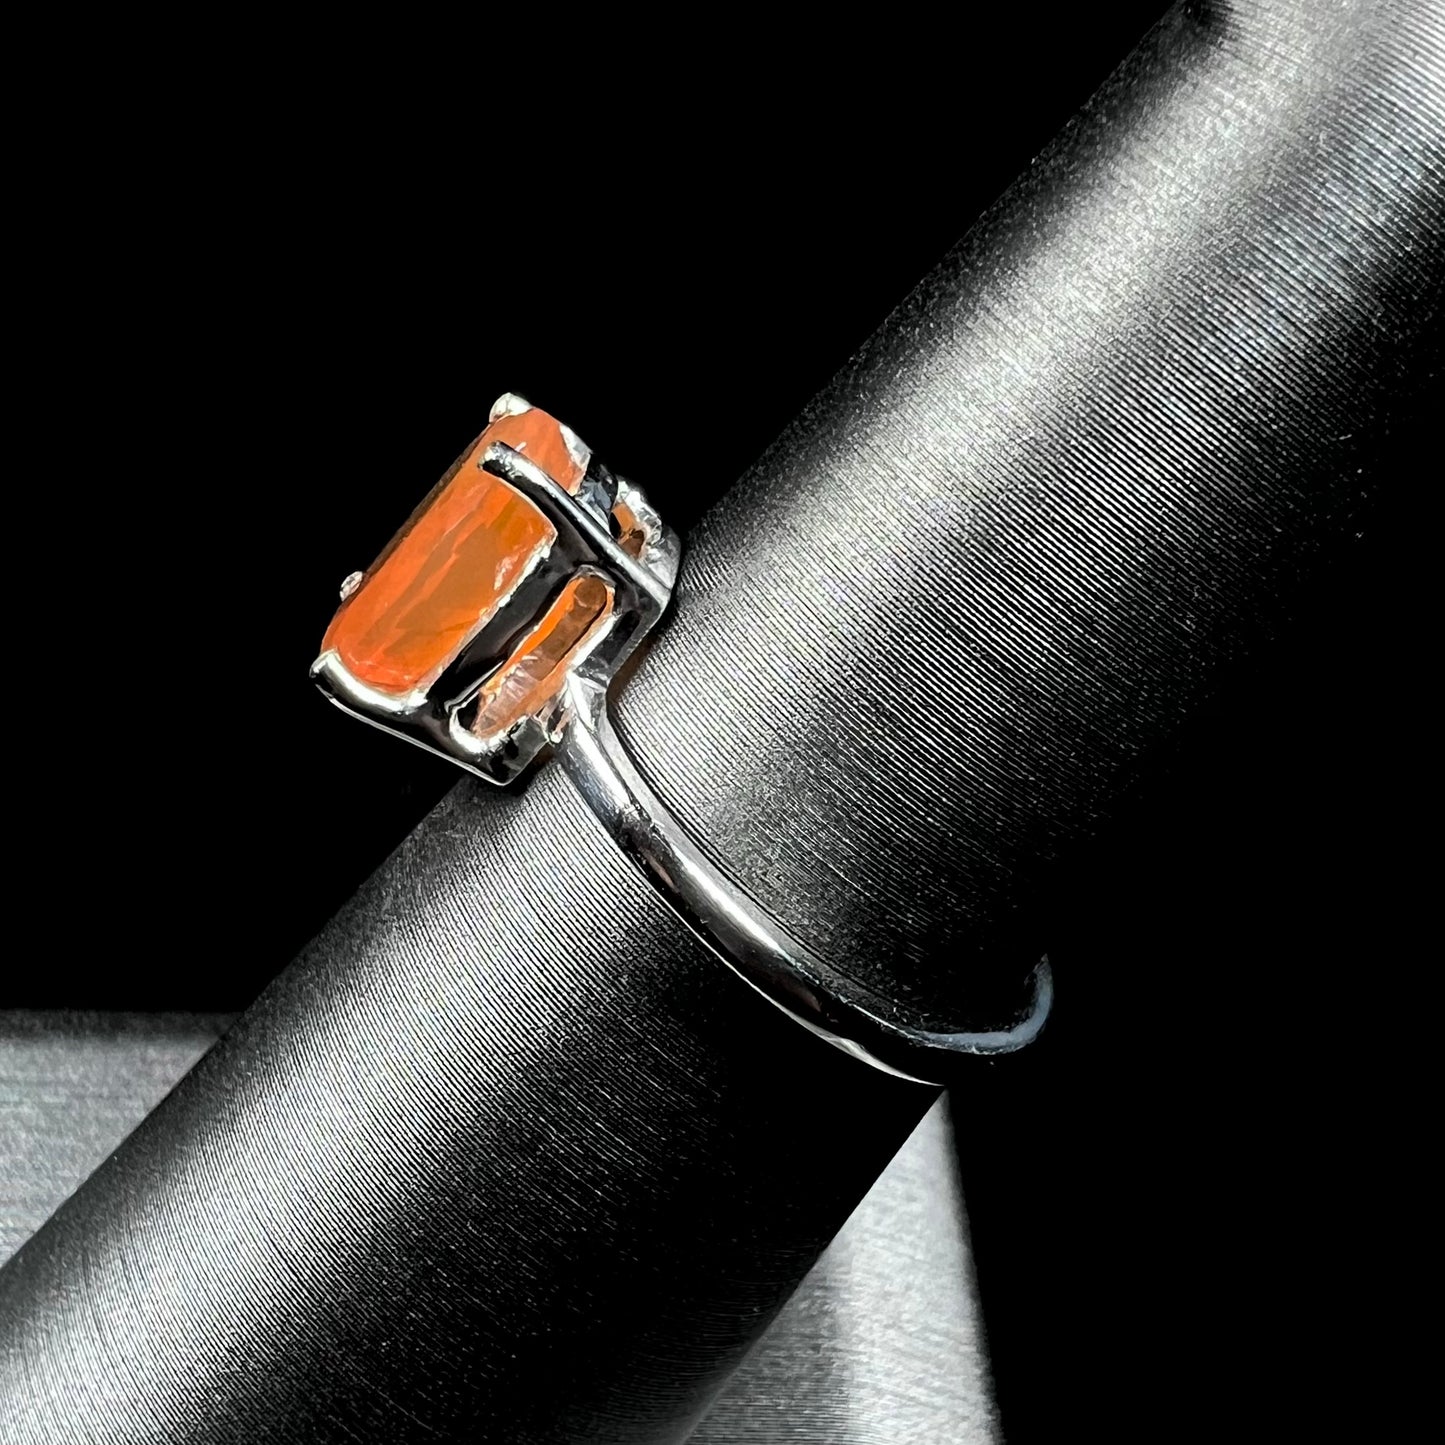 A silver solitaire ring set with a natural, faceted oval cut Mexican fire opal.  The stone is a bright orange color.